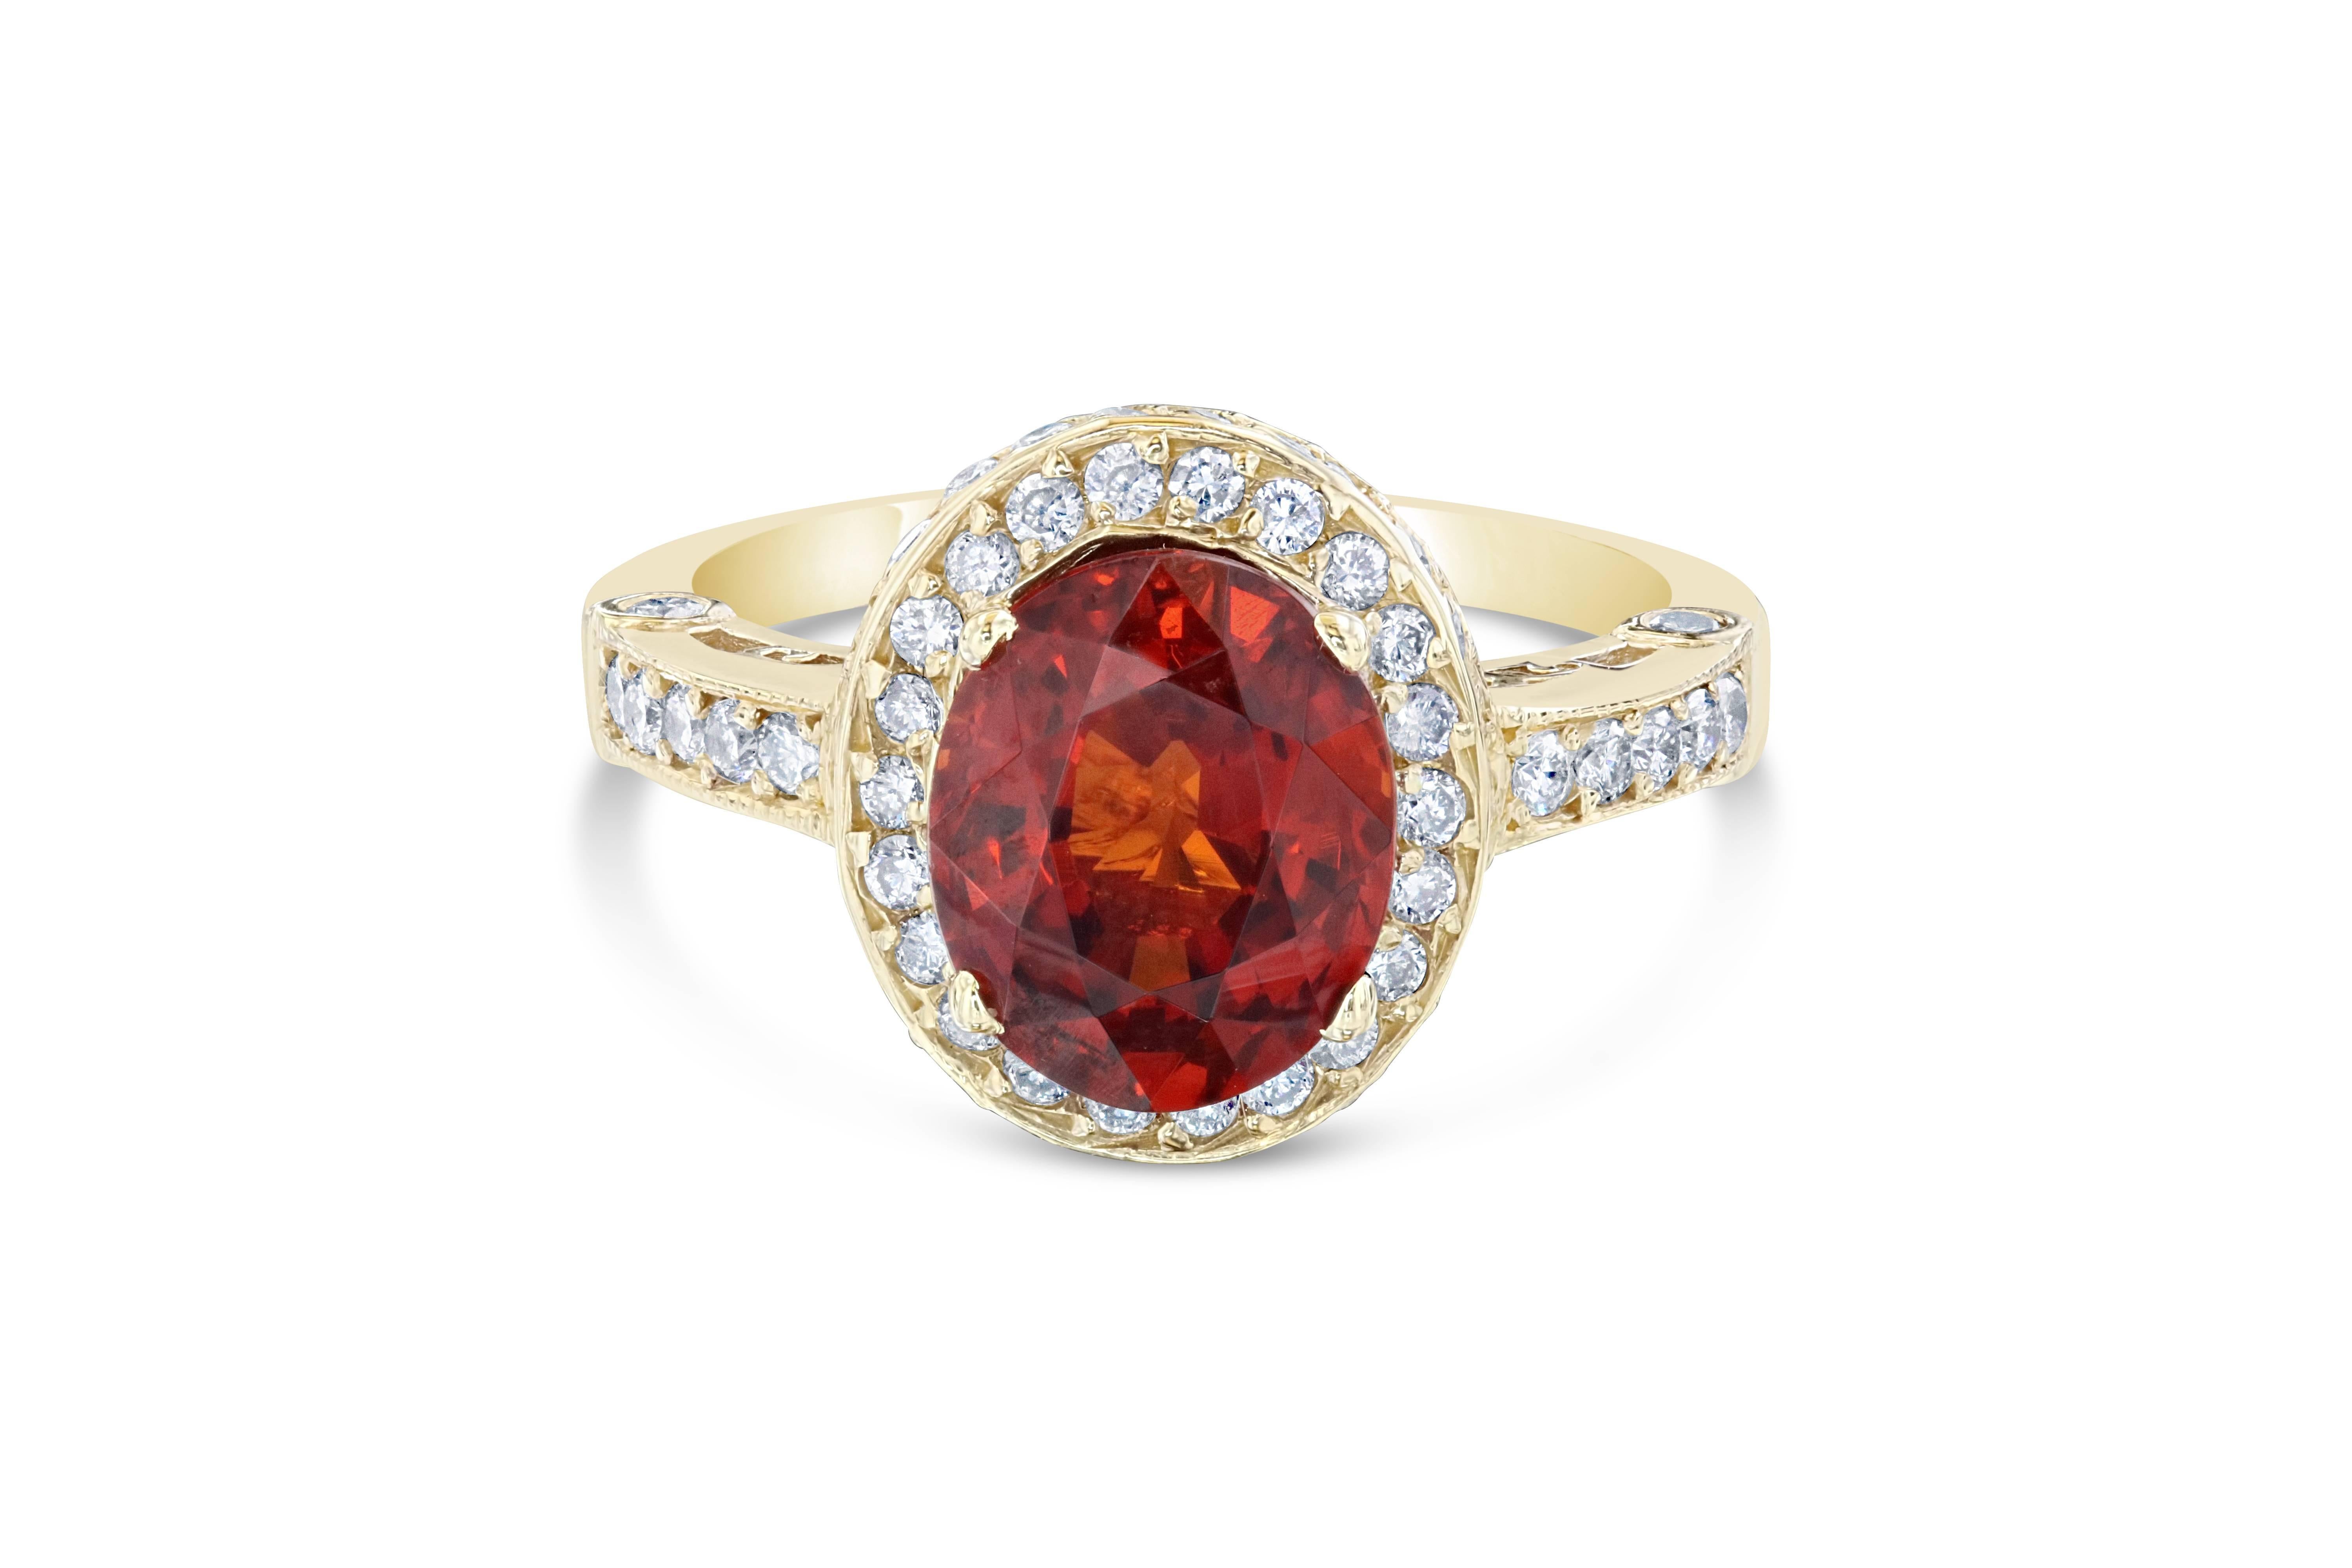 A gorgeous ring that can double as an engagement ring.  This beautiful ring has a 3.78 carat Oval Cut Spessartite set in the center of the ring. A Spessartite is a natural stone that is actually a part of the Garnet family of stones. The ring is